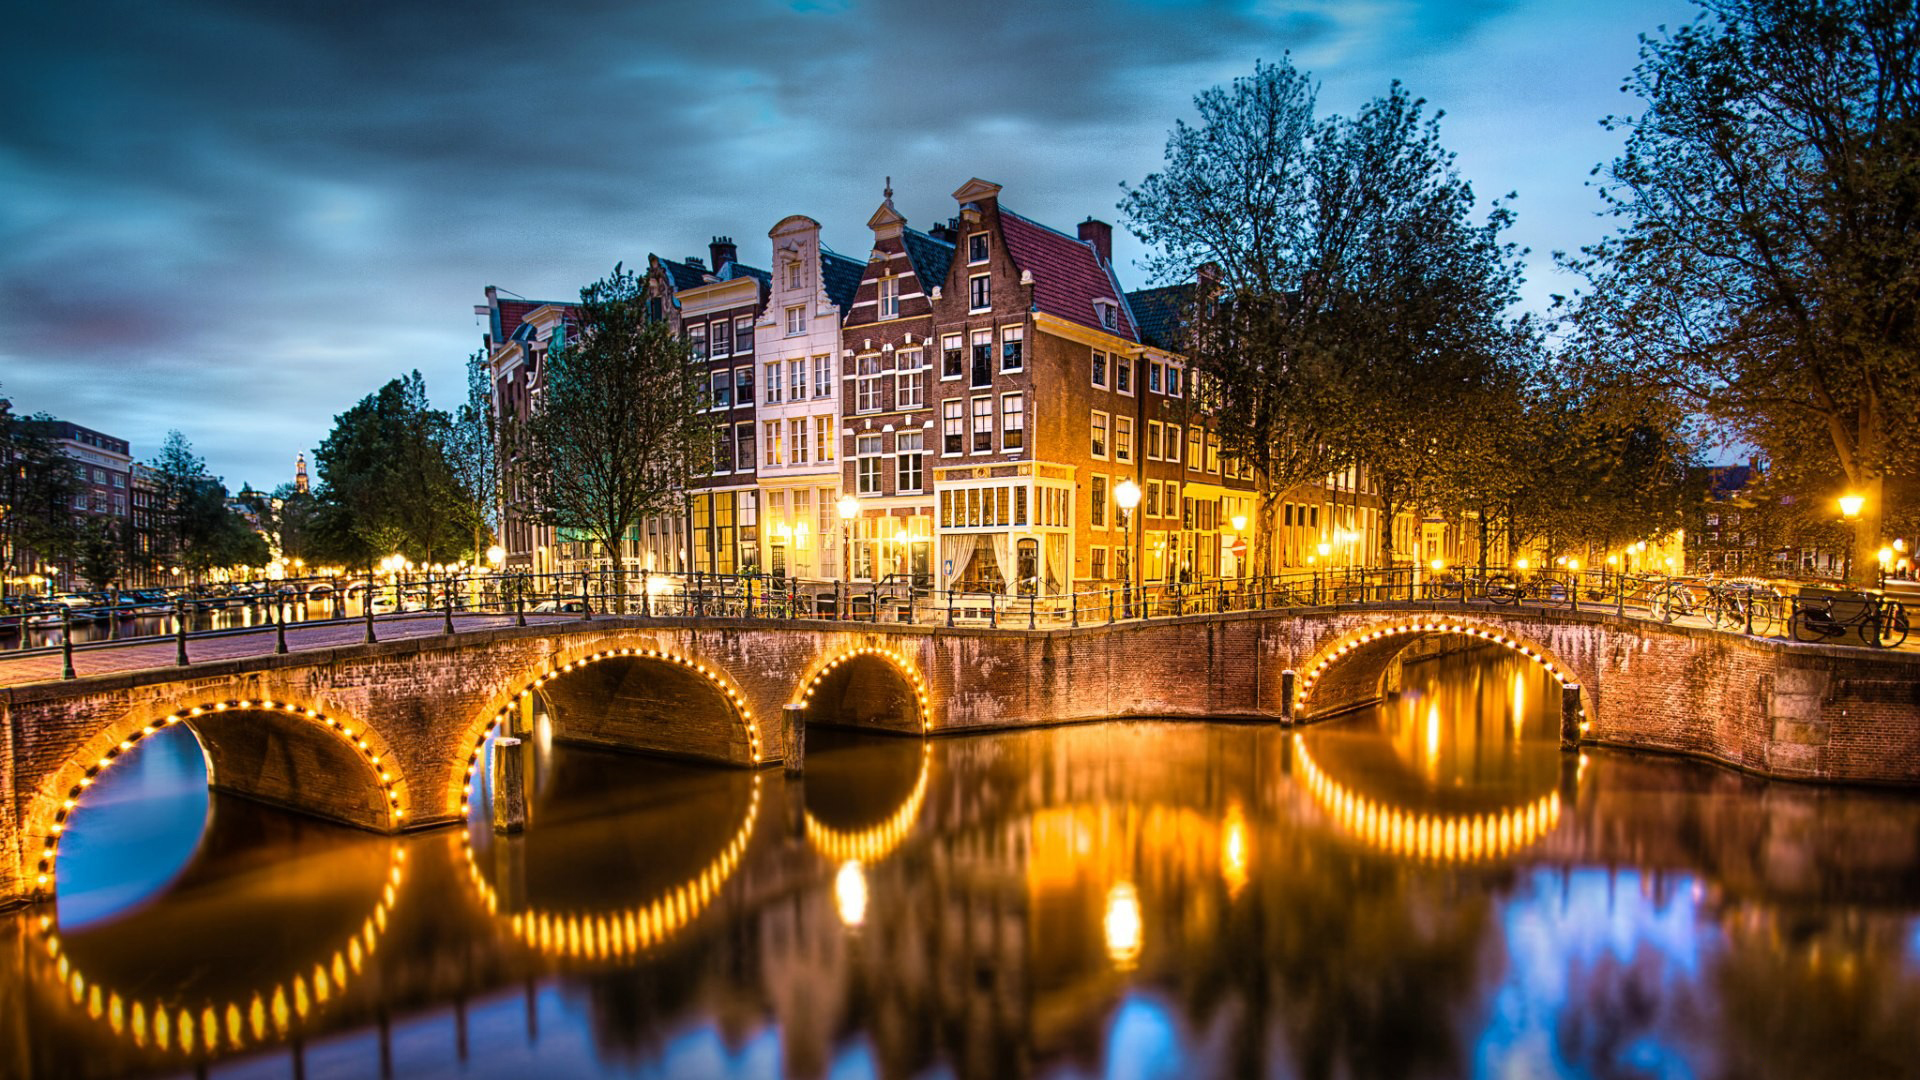 The netherlands wallpapers desktop backgrounds hd pictures and images